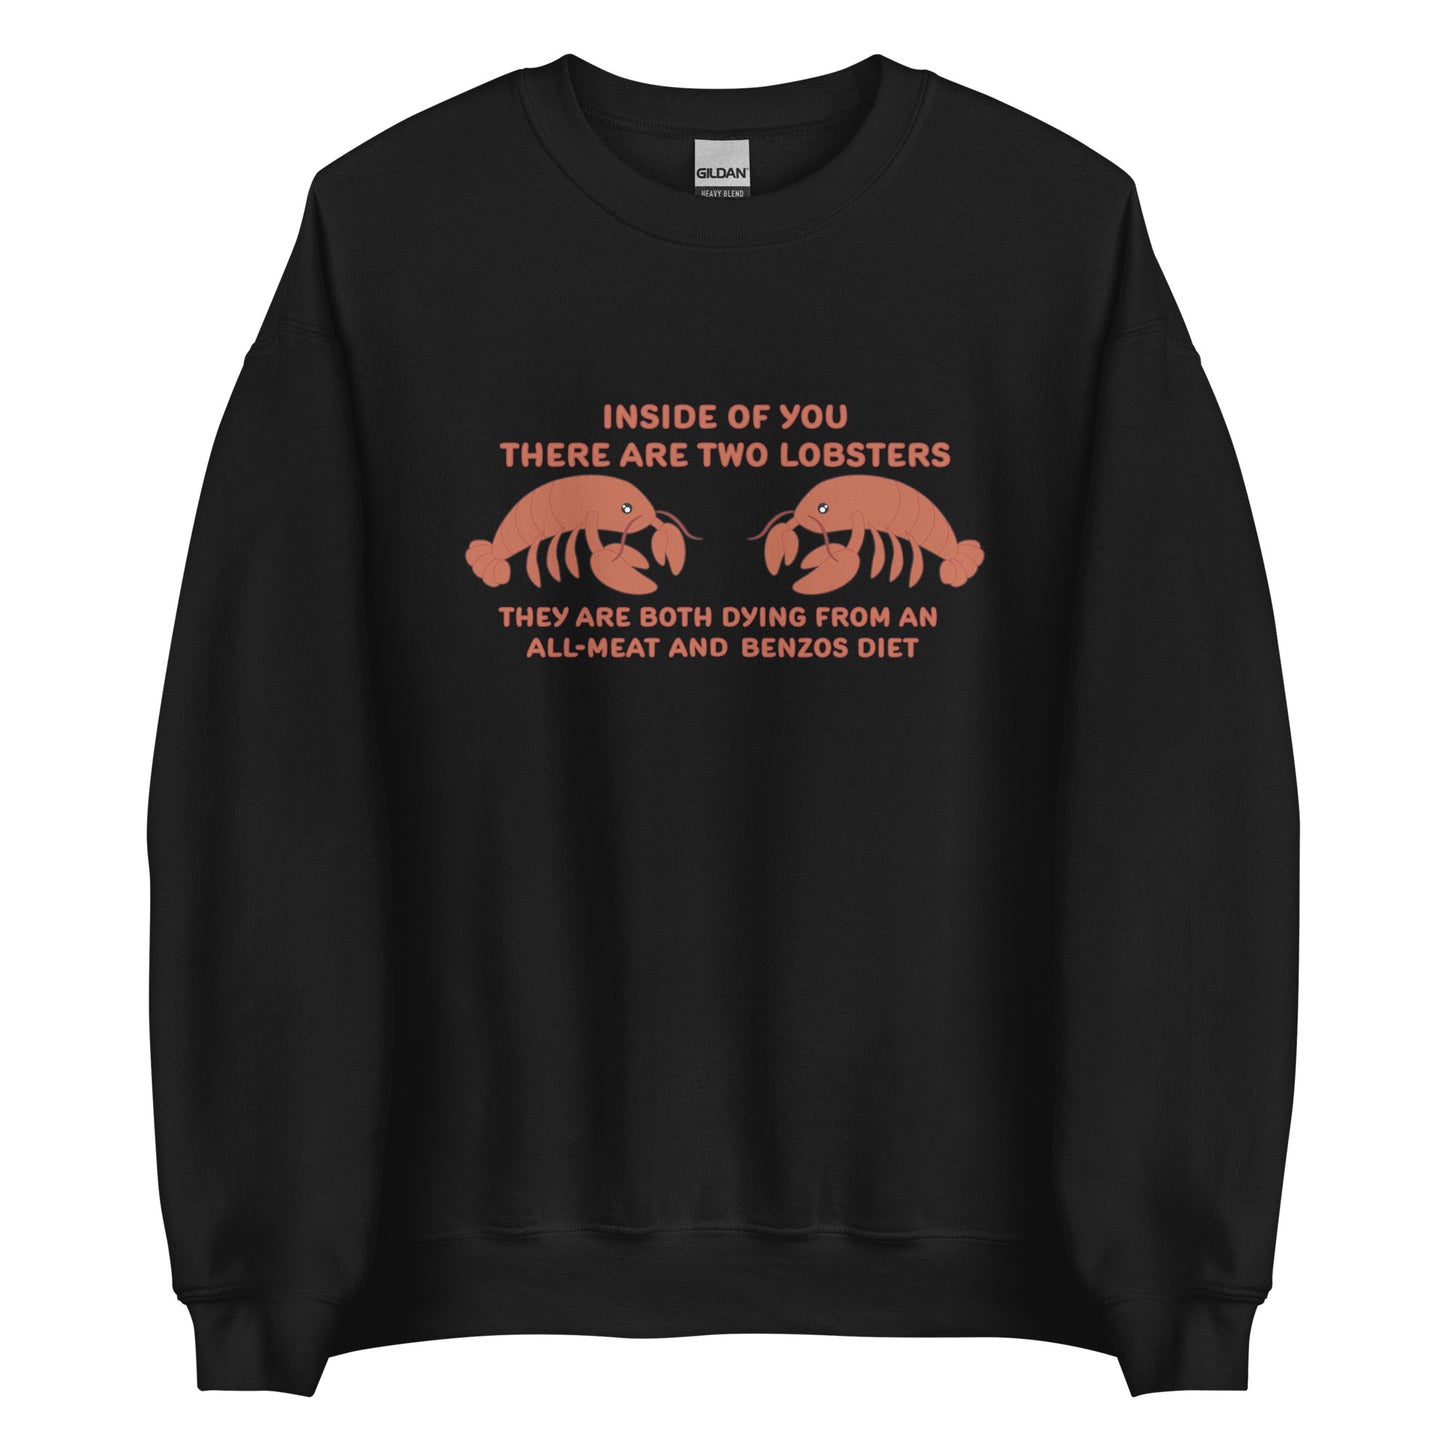 A black crewneck sweatshirt featuring an illustration of two lobsters. Text around the lobsters reads "Inside of you there are two lobsters. They are both dying from an all-meat and benzos diet."